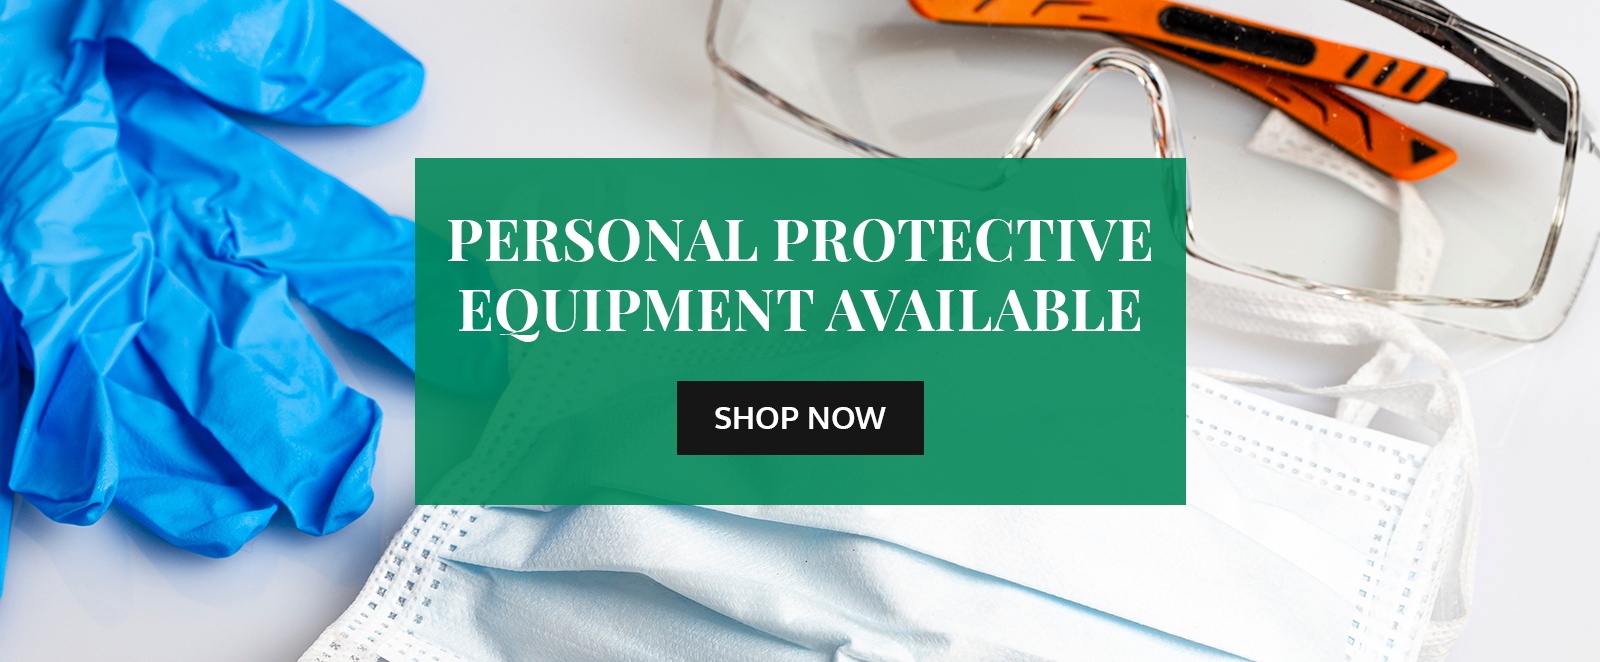 Personal Protective Equipment